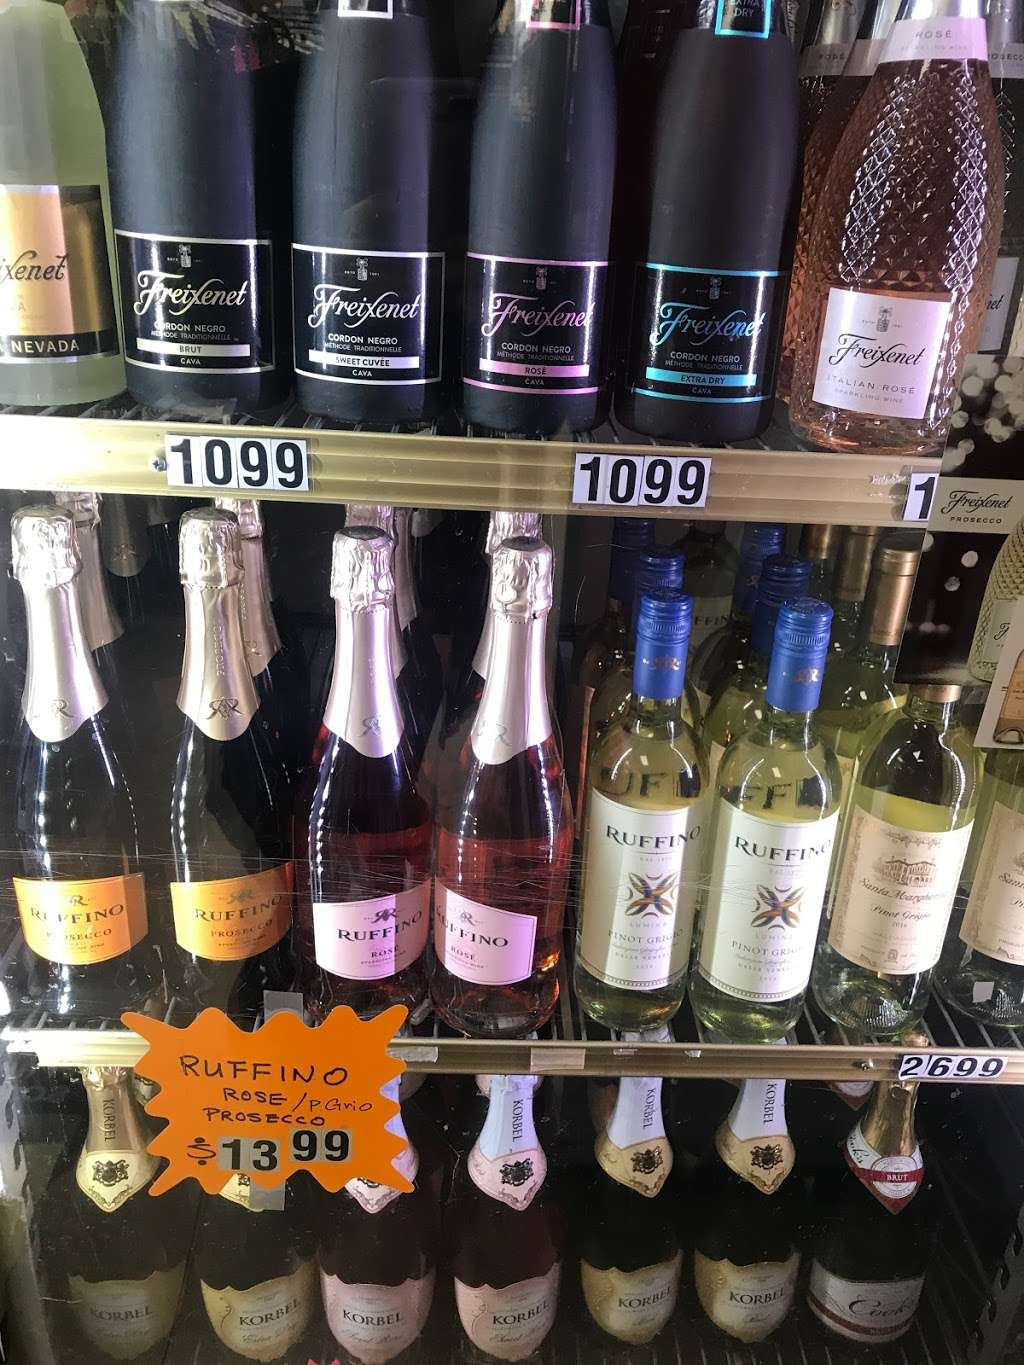 Annapolis Wine & Spirits | 1307 Forest Dr, Annapolis, MD 21403 | Phone: (410) 263-7117